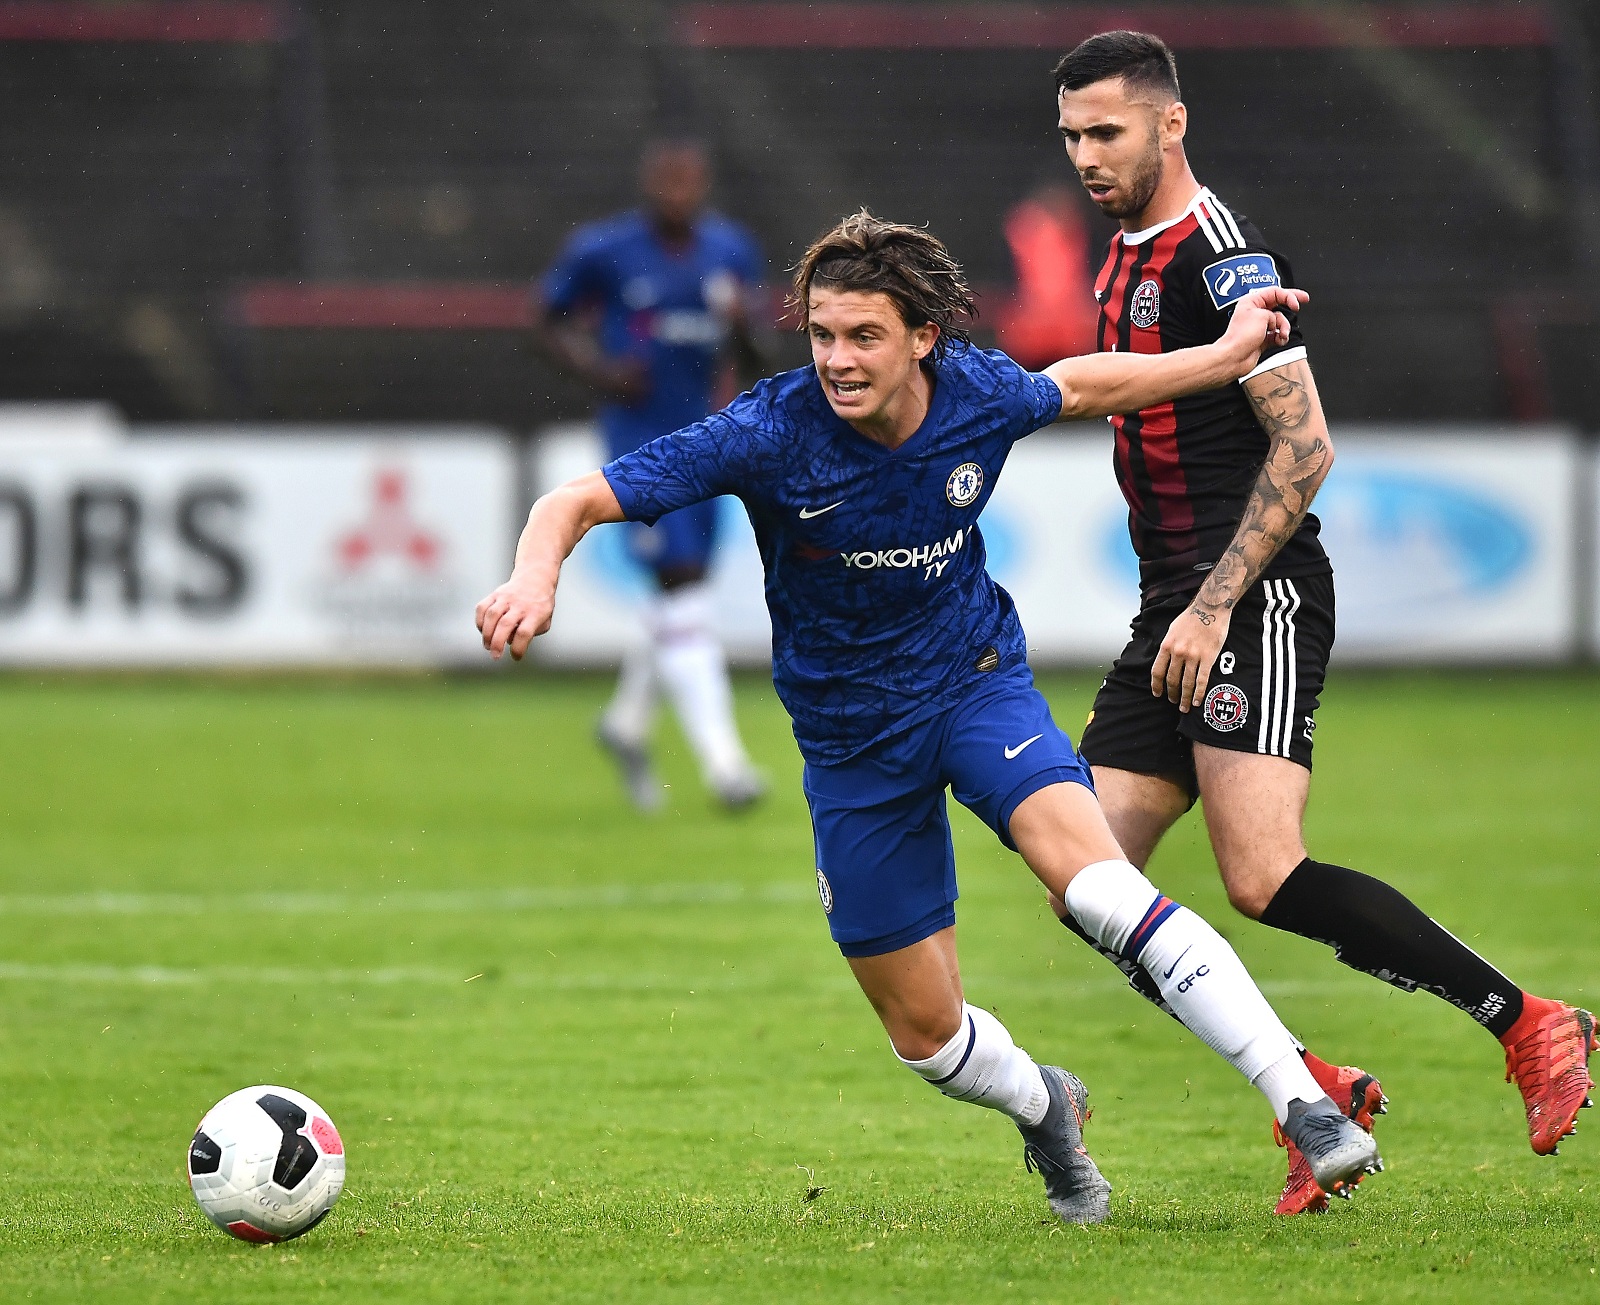 Conor Gallagher is amongst the best young talents at Chelsea